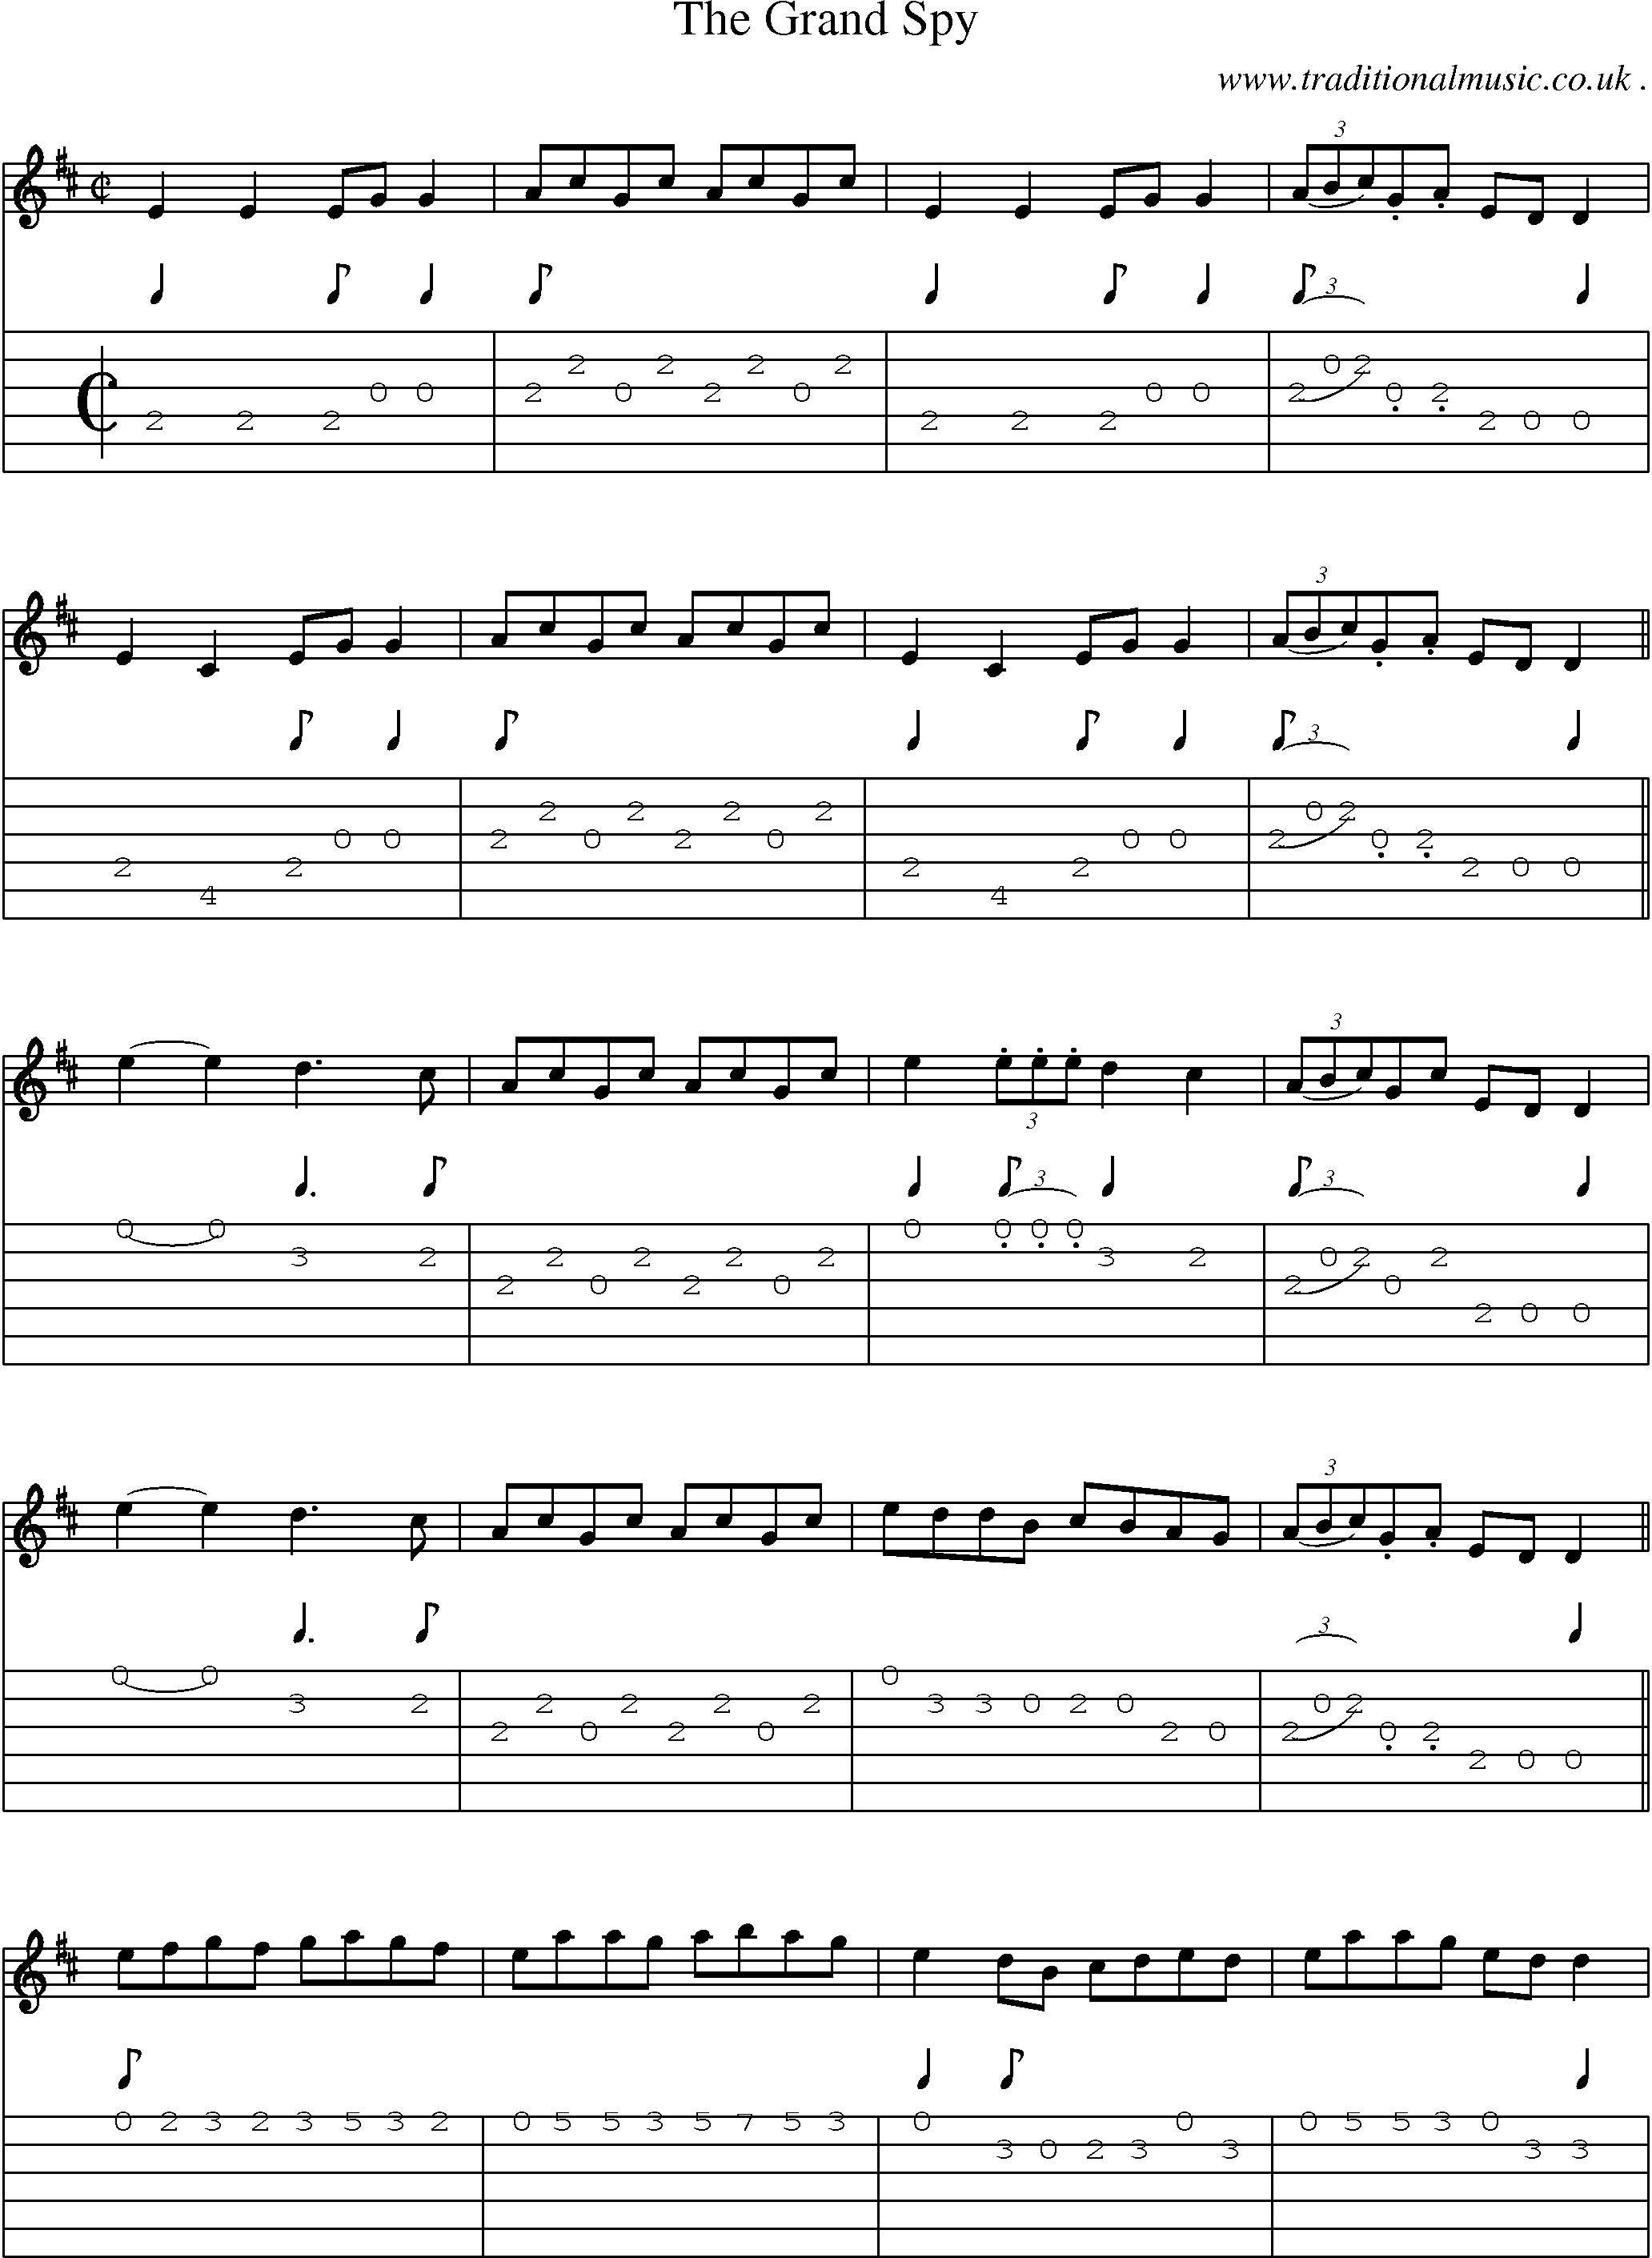 Sheet-Music and Guitar Tabs for The Grand Spy